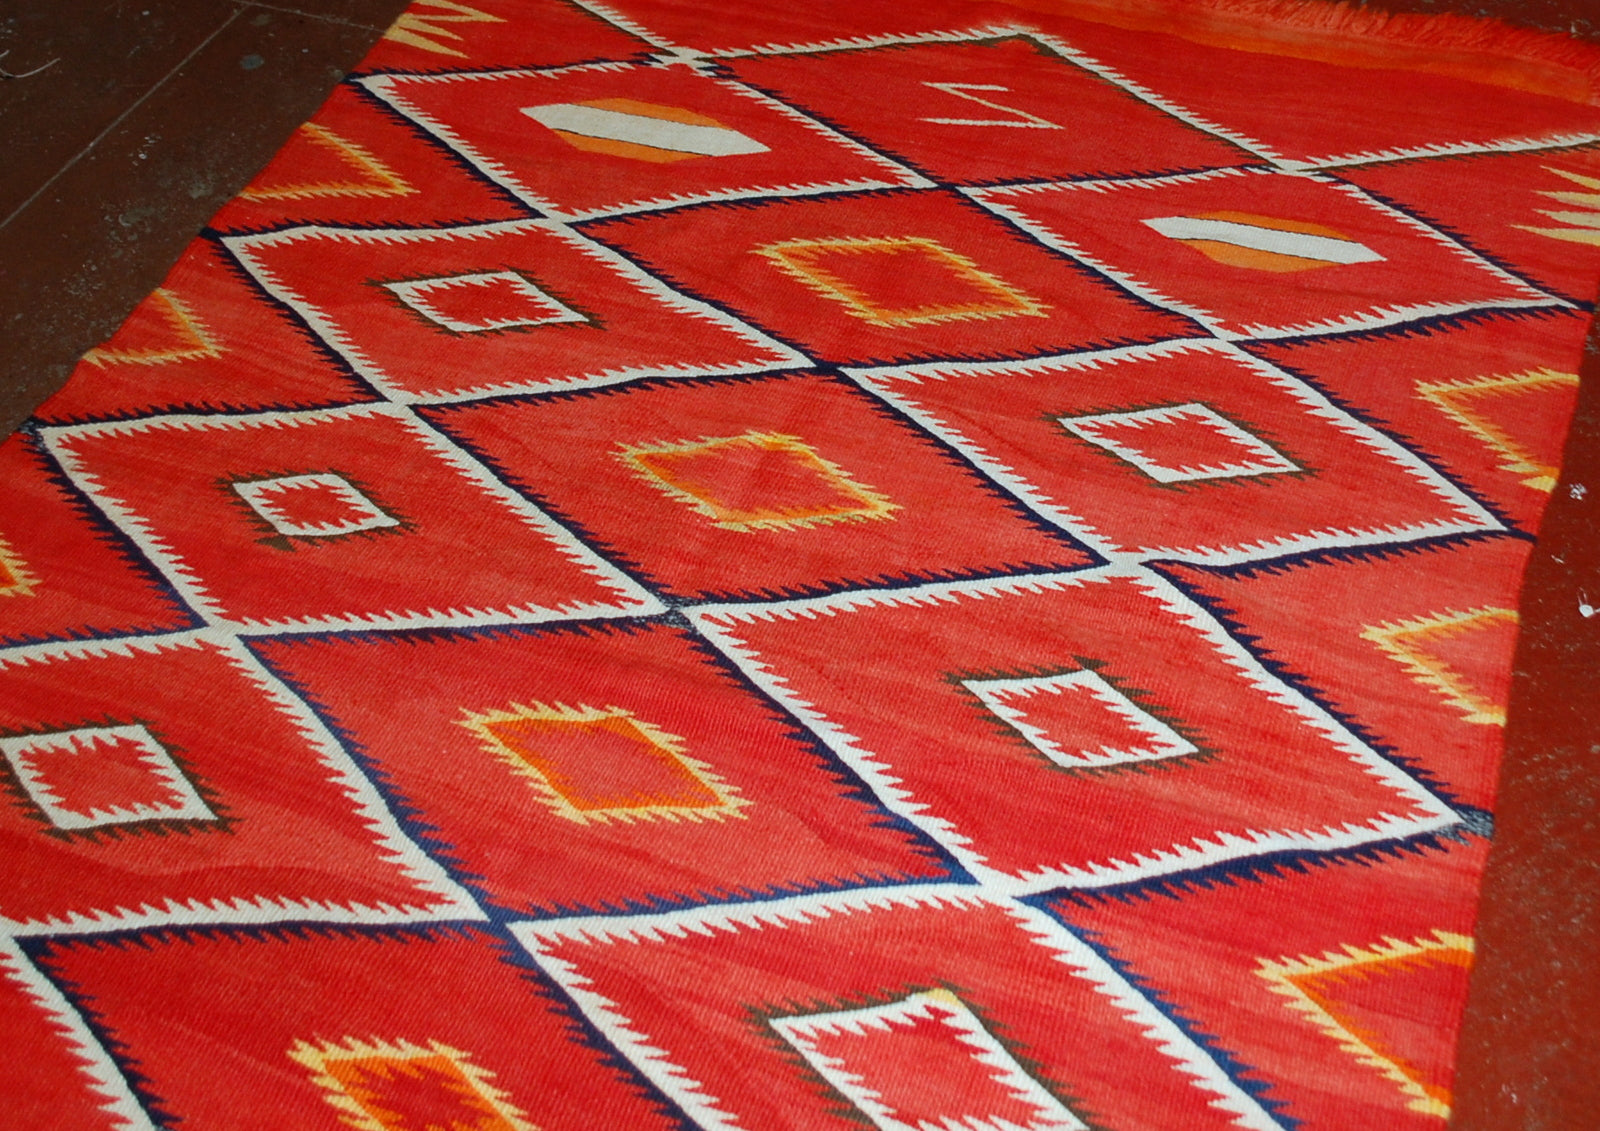 Antique hand-woven American-Indian Navajo blanket in original good condition. The blanket has been made in the end of 19th century in bright red shade. Repeating diamonds are in white and indigo shades. Smaller inner diamonds are in yellow and orange.